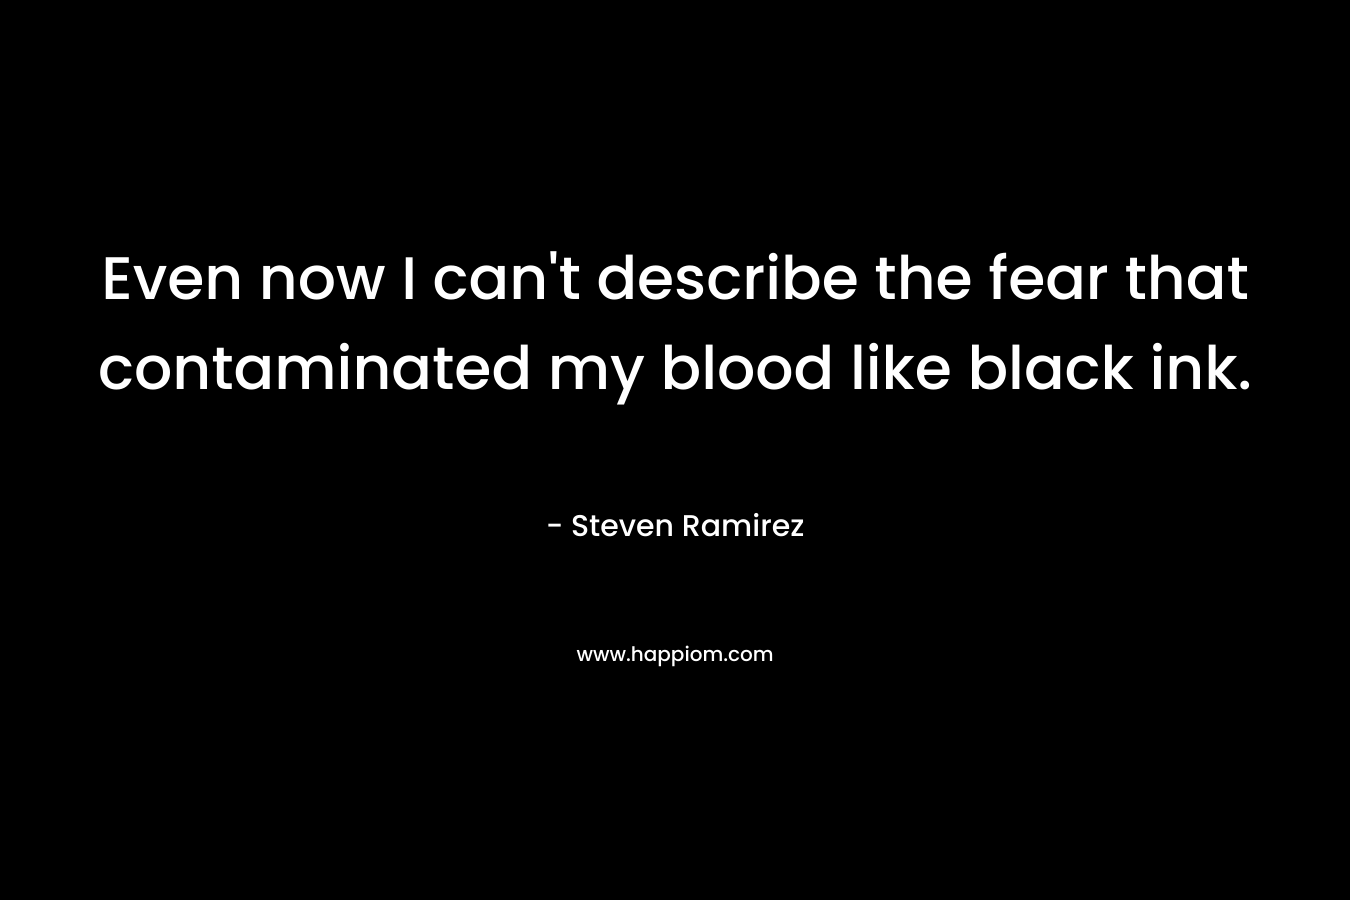 Even now I can’t describe the fear that contaminated my blood like black ink. – Steven Ramirez